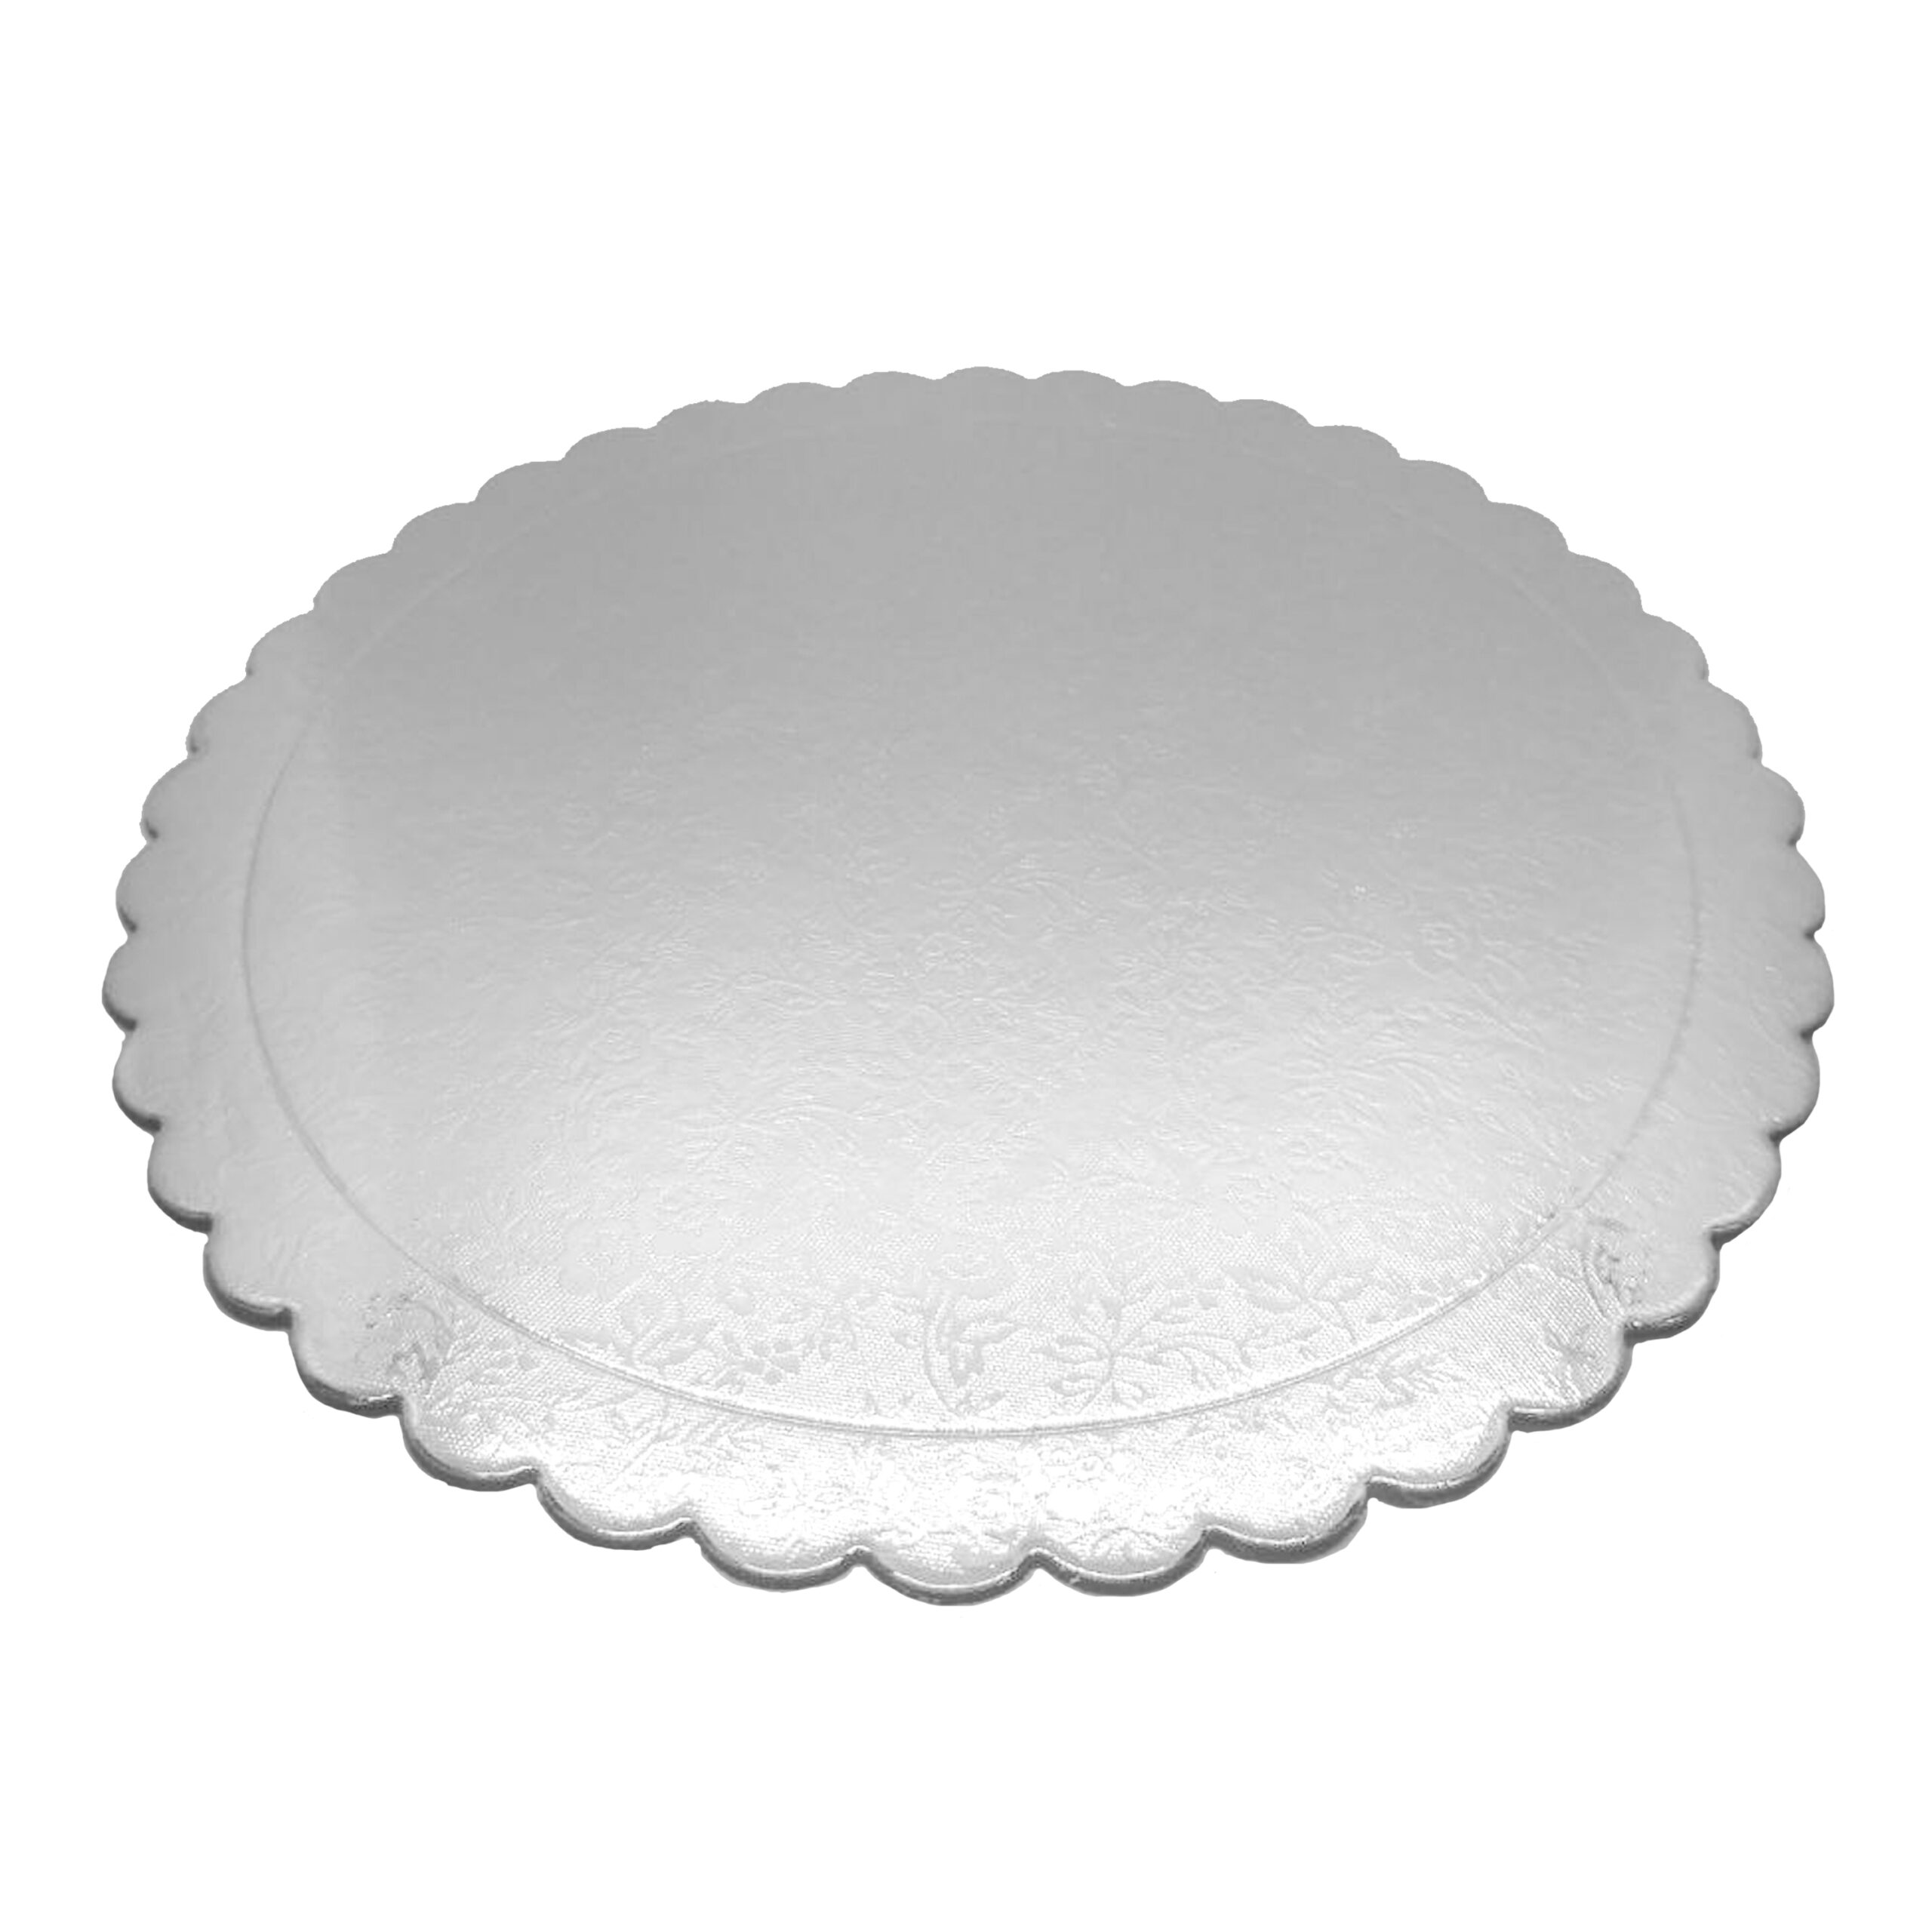 CAKE BOARD
PAPER ROUND
SILVER EMBOSSED
10" 2mm